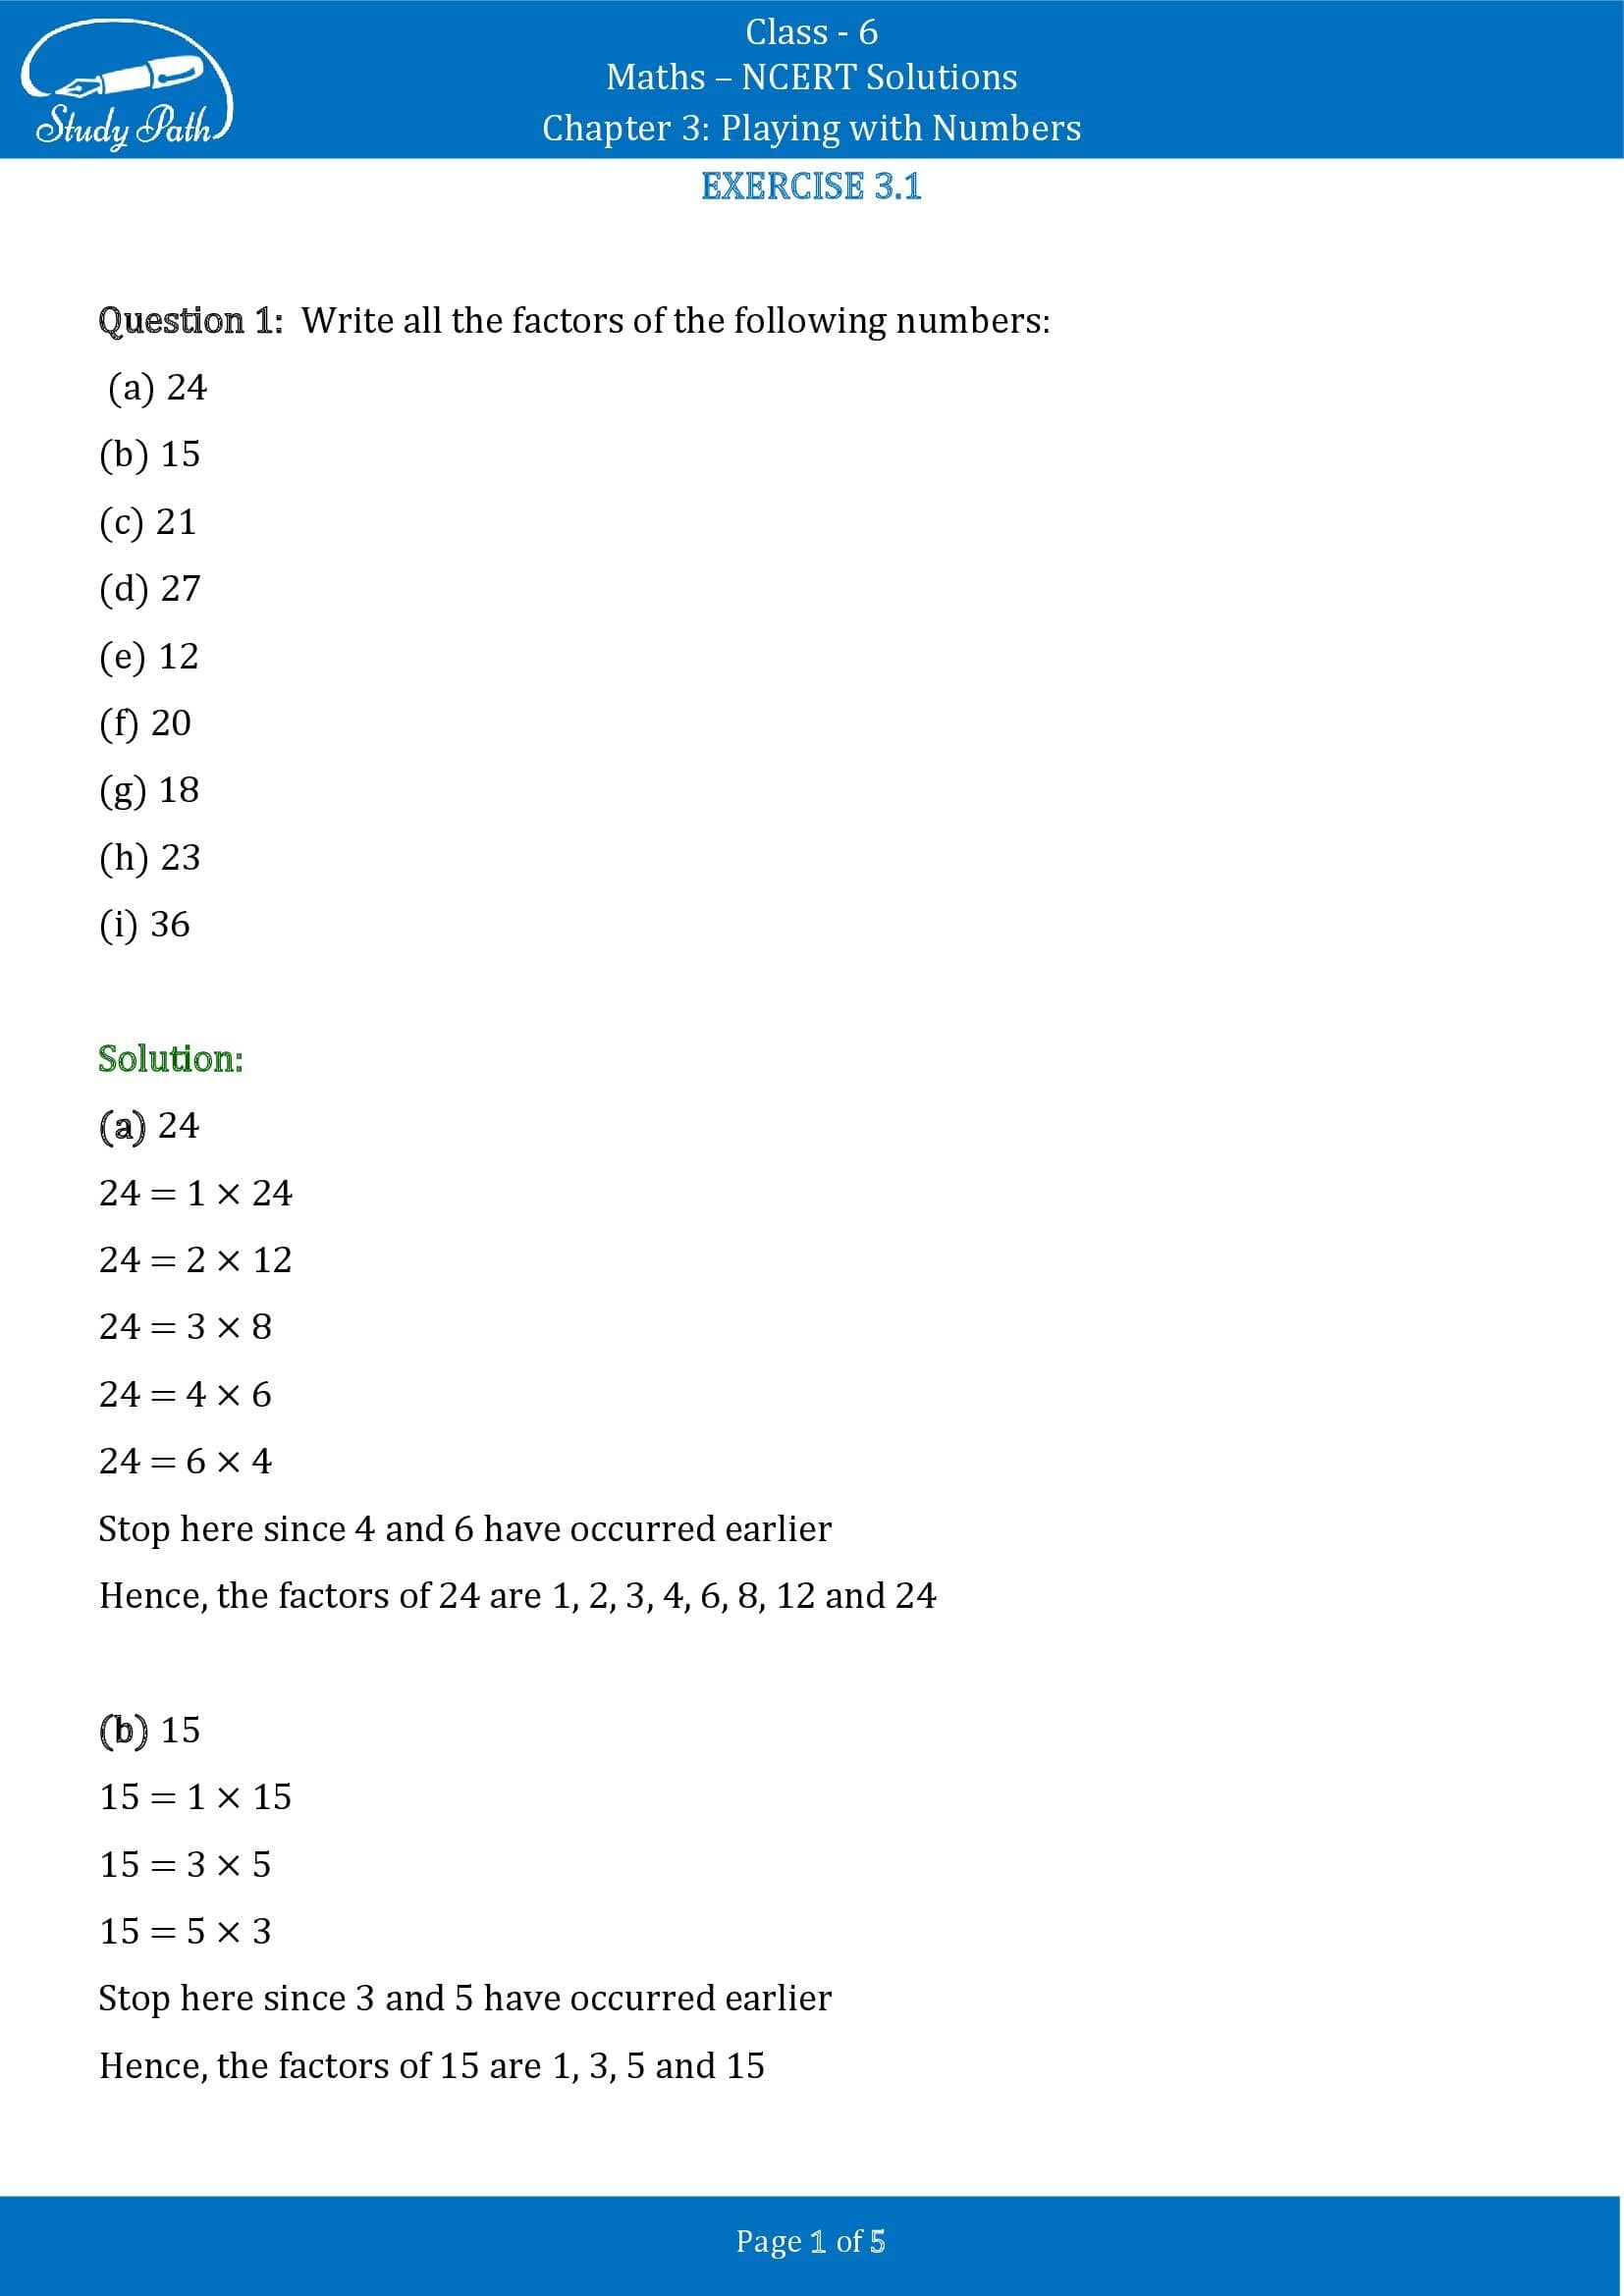 NCERT Solutions for Class 6 Maths Chapter 3 Playing with Numbers Exercise 3.1 00001